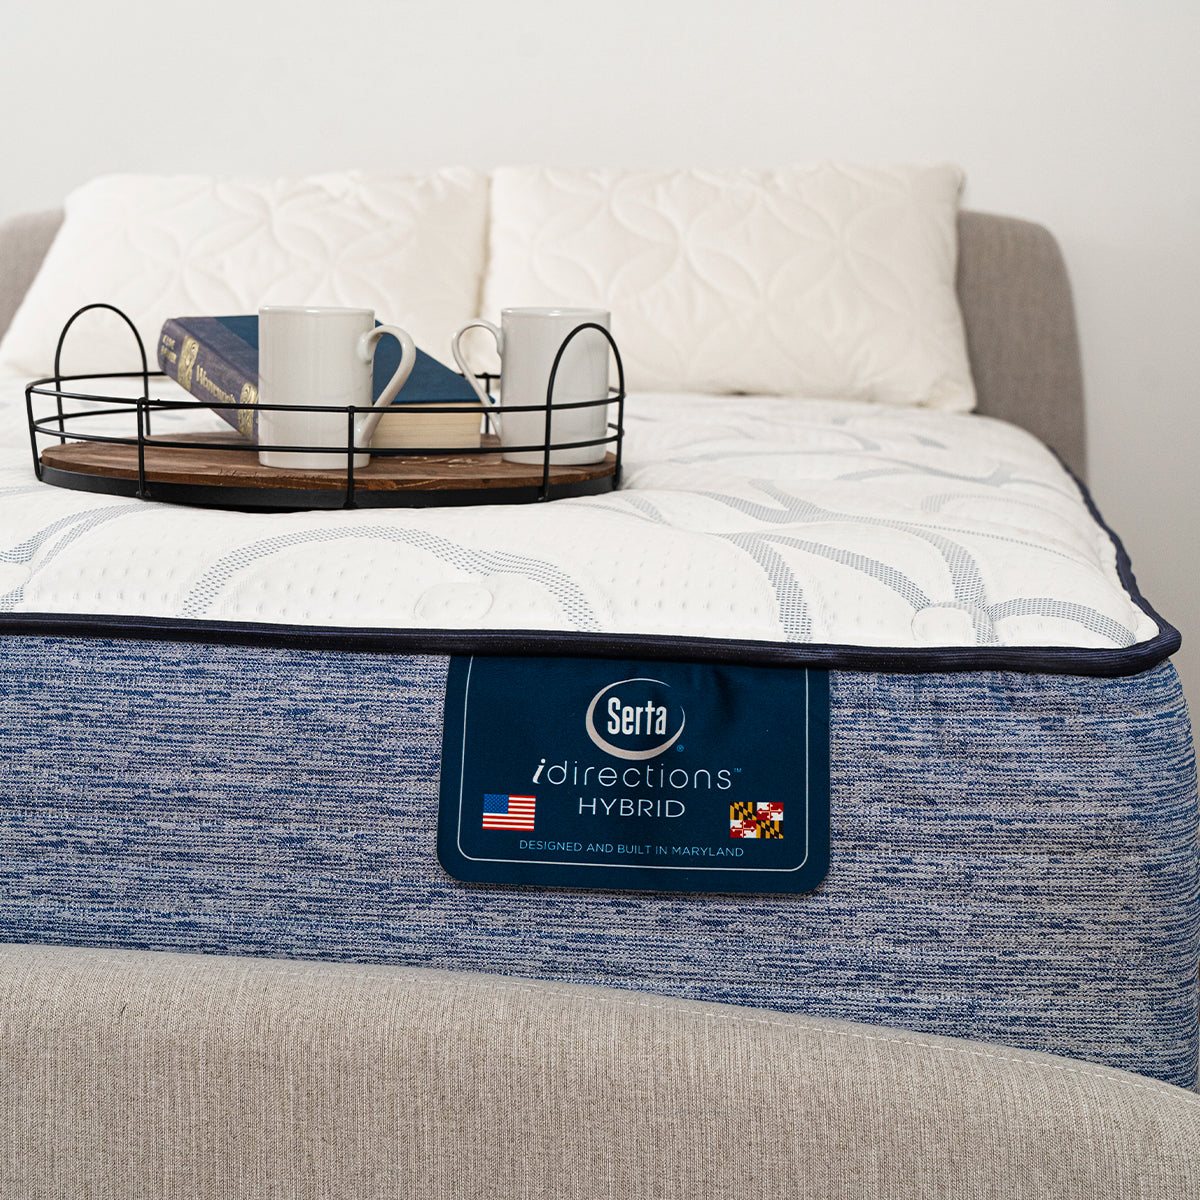 Serta iDirections X7 Hybrid II Plush Mattress Corner Detail With Product Tag; Designed and Built in Maryland